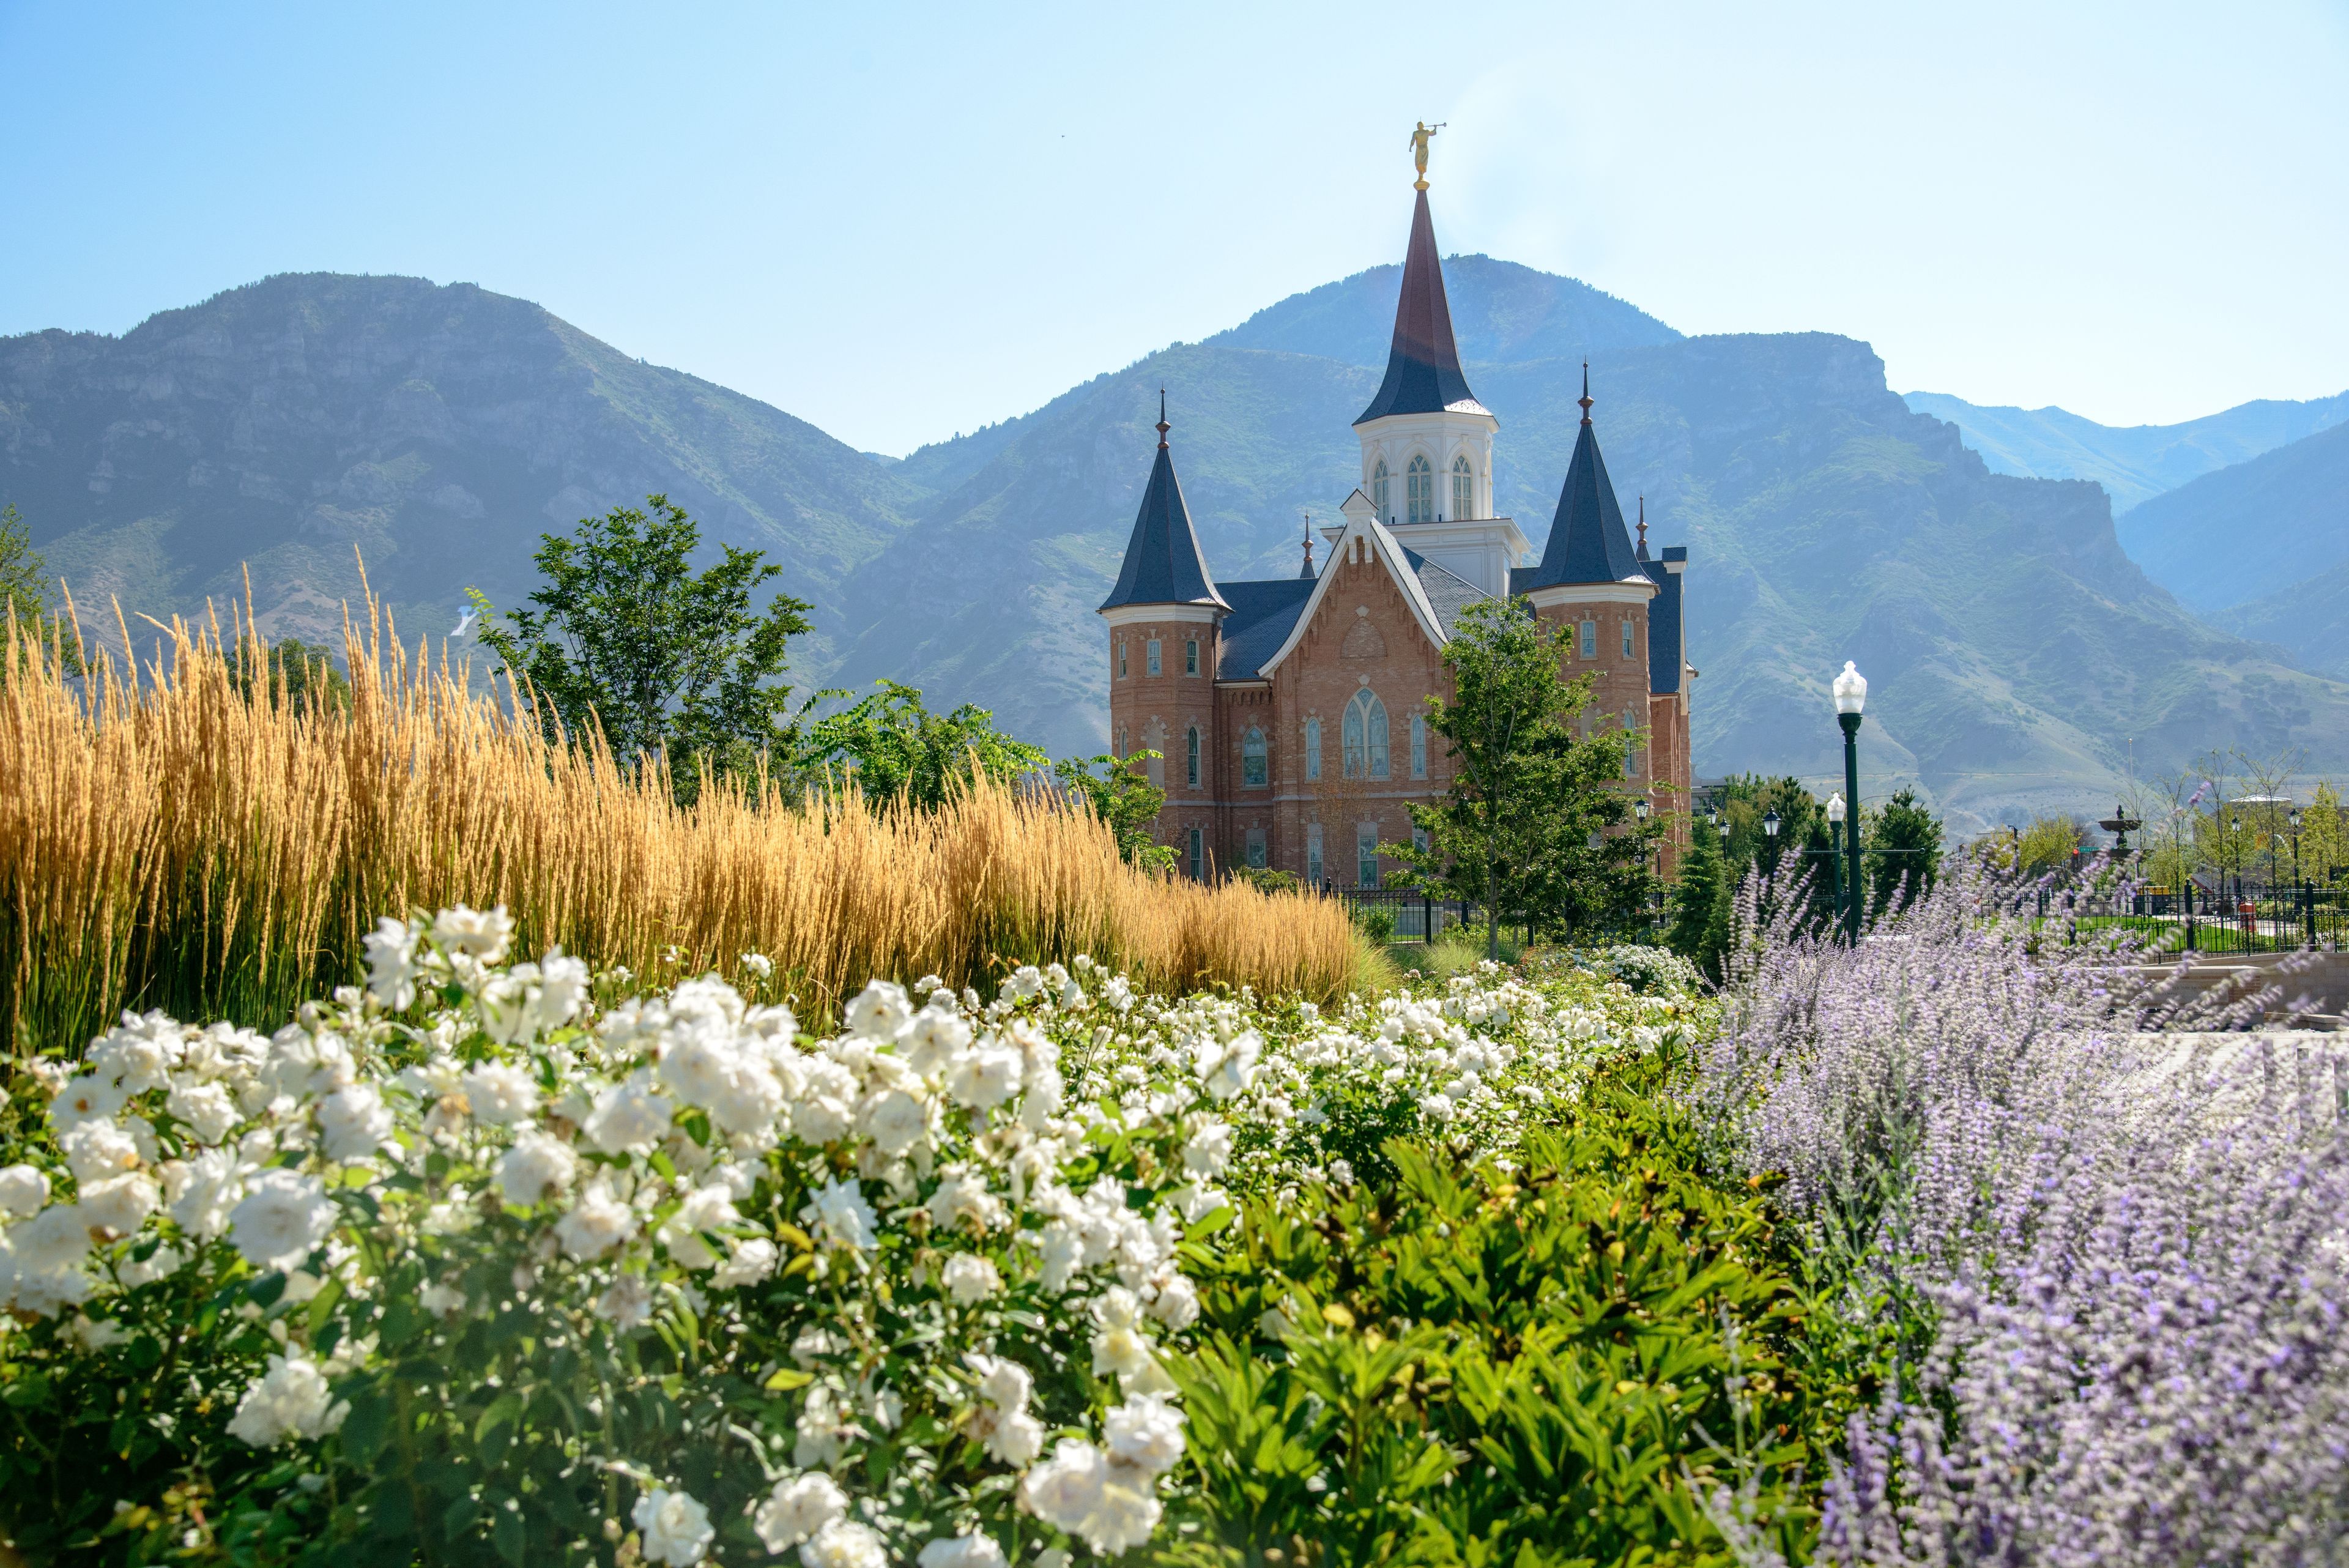 Vegetation around the Provo City Center Temple, with mountains in the background.